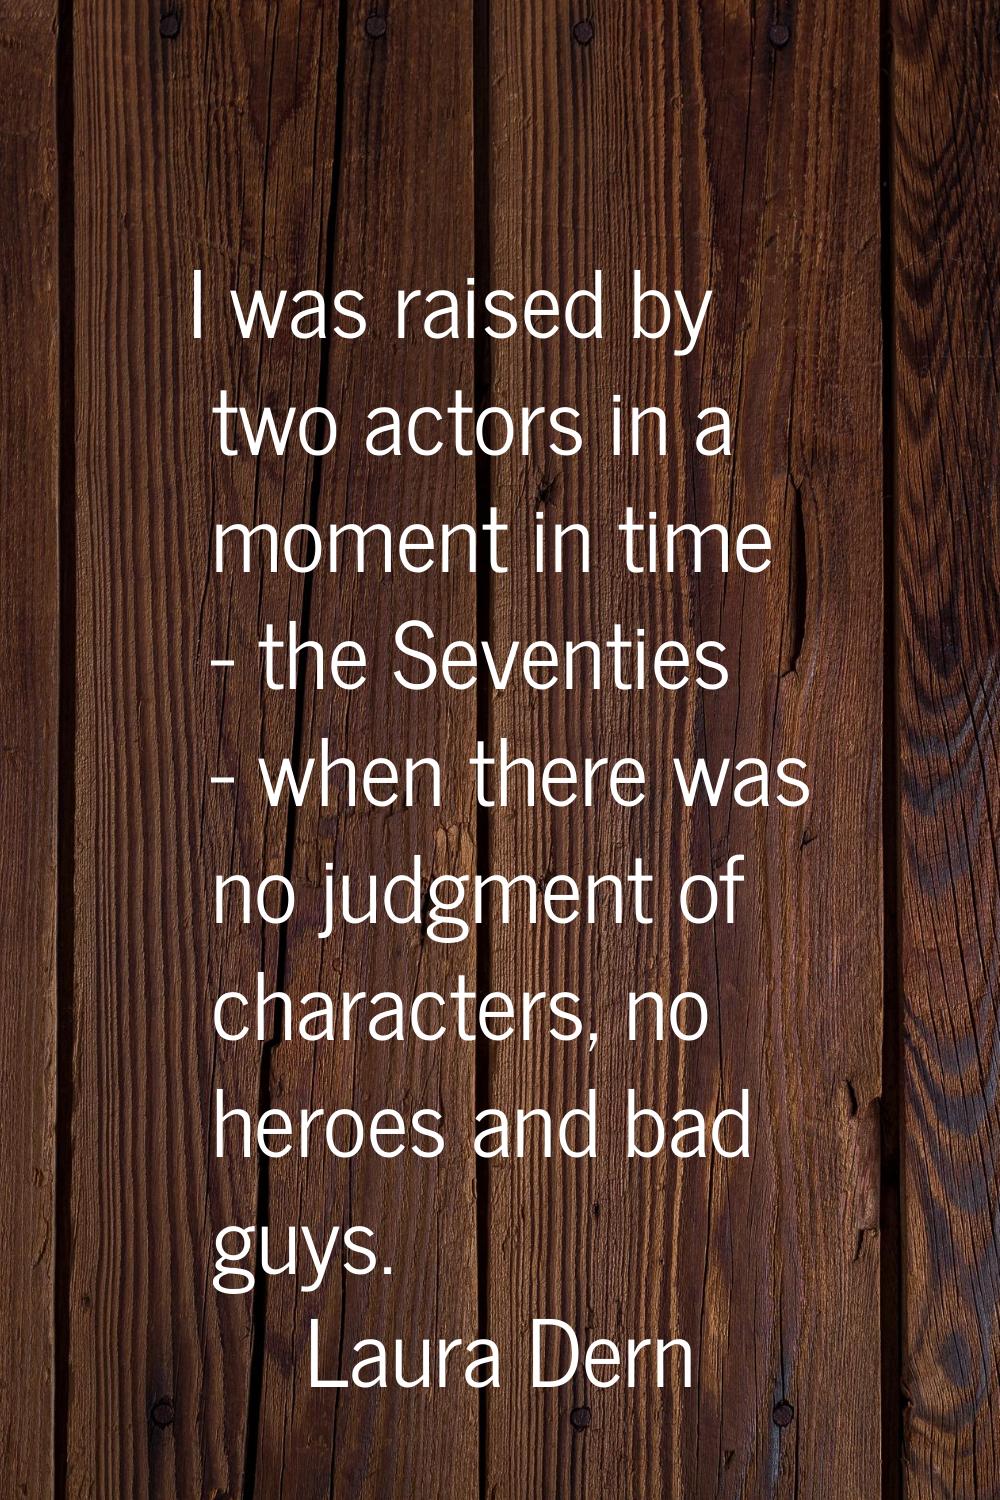 I was raised by two actors in a moment in time - the Seventies - when there was no judgment of char